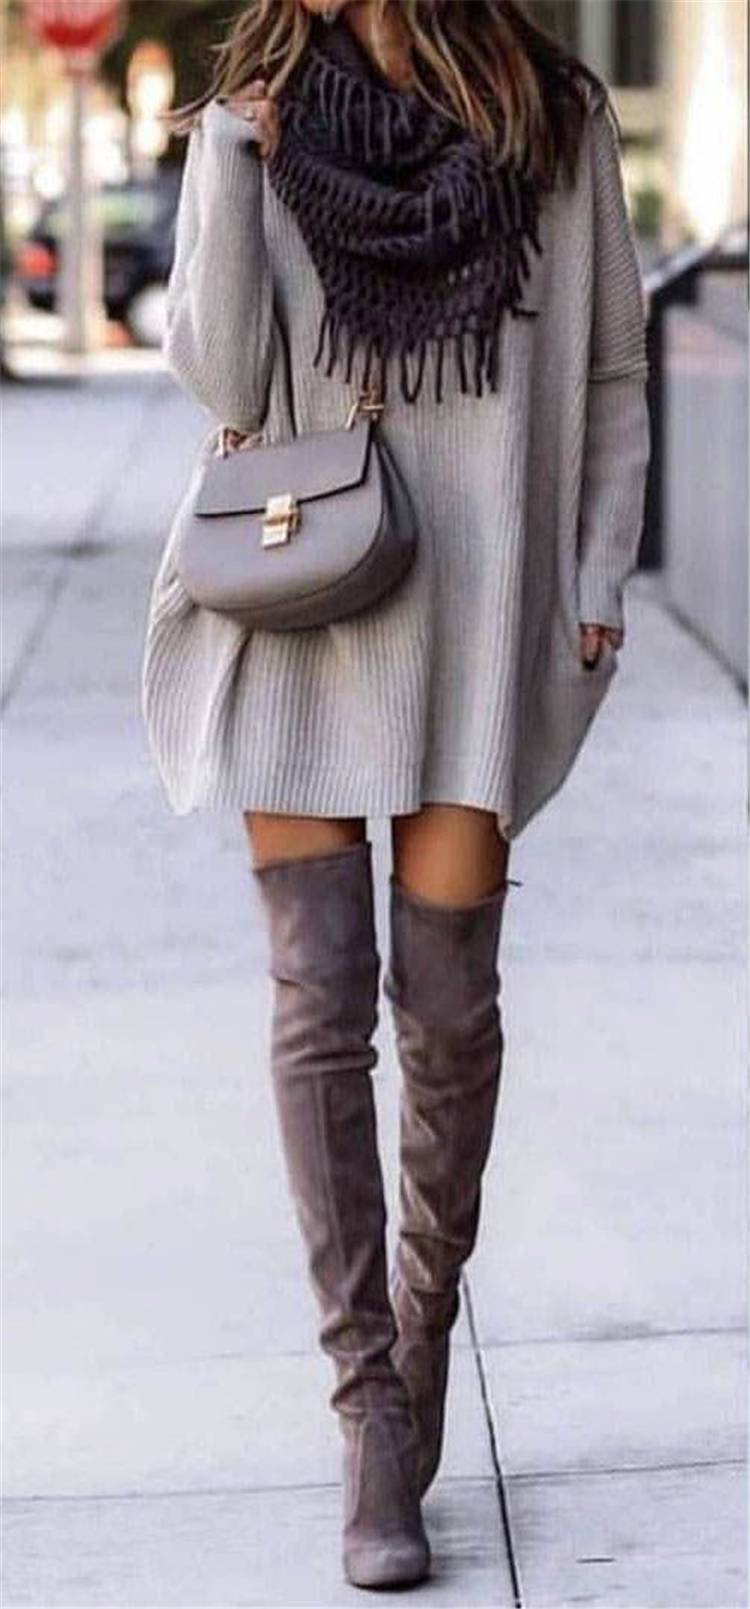 Gorgeous And Casual Winter Outfits With A Scarf; Winter Outfits; Outfits; Casual Outfits; Outfits With Scarf; Jacket With Scarf; Coat With Scarf; Oversize Sweater; #winteroutfits #outfits #casualoutfits #scarf #winterscarf #coatwithscarf #oversizesweater